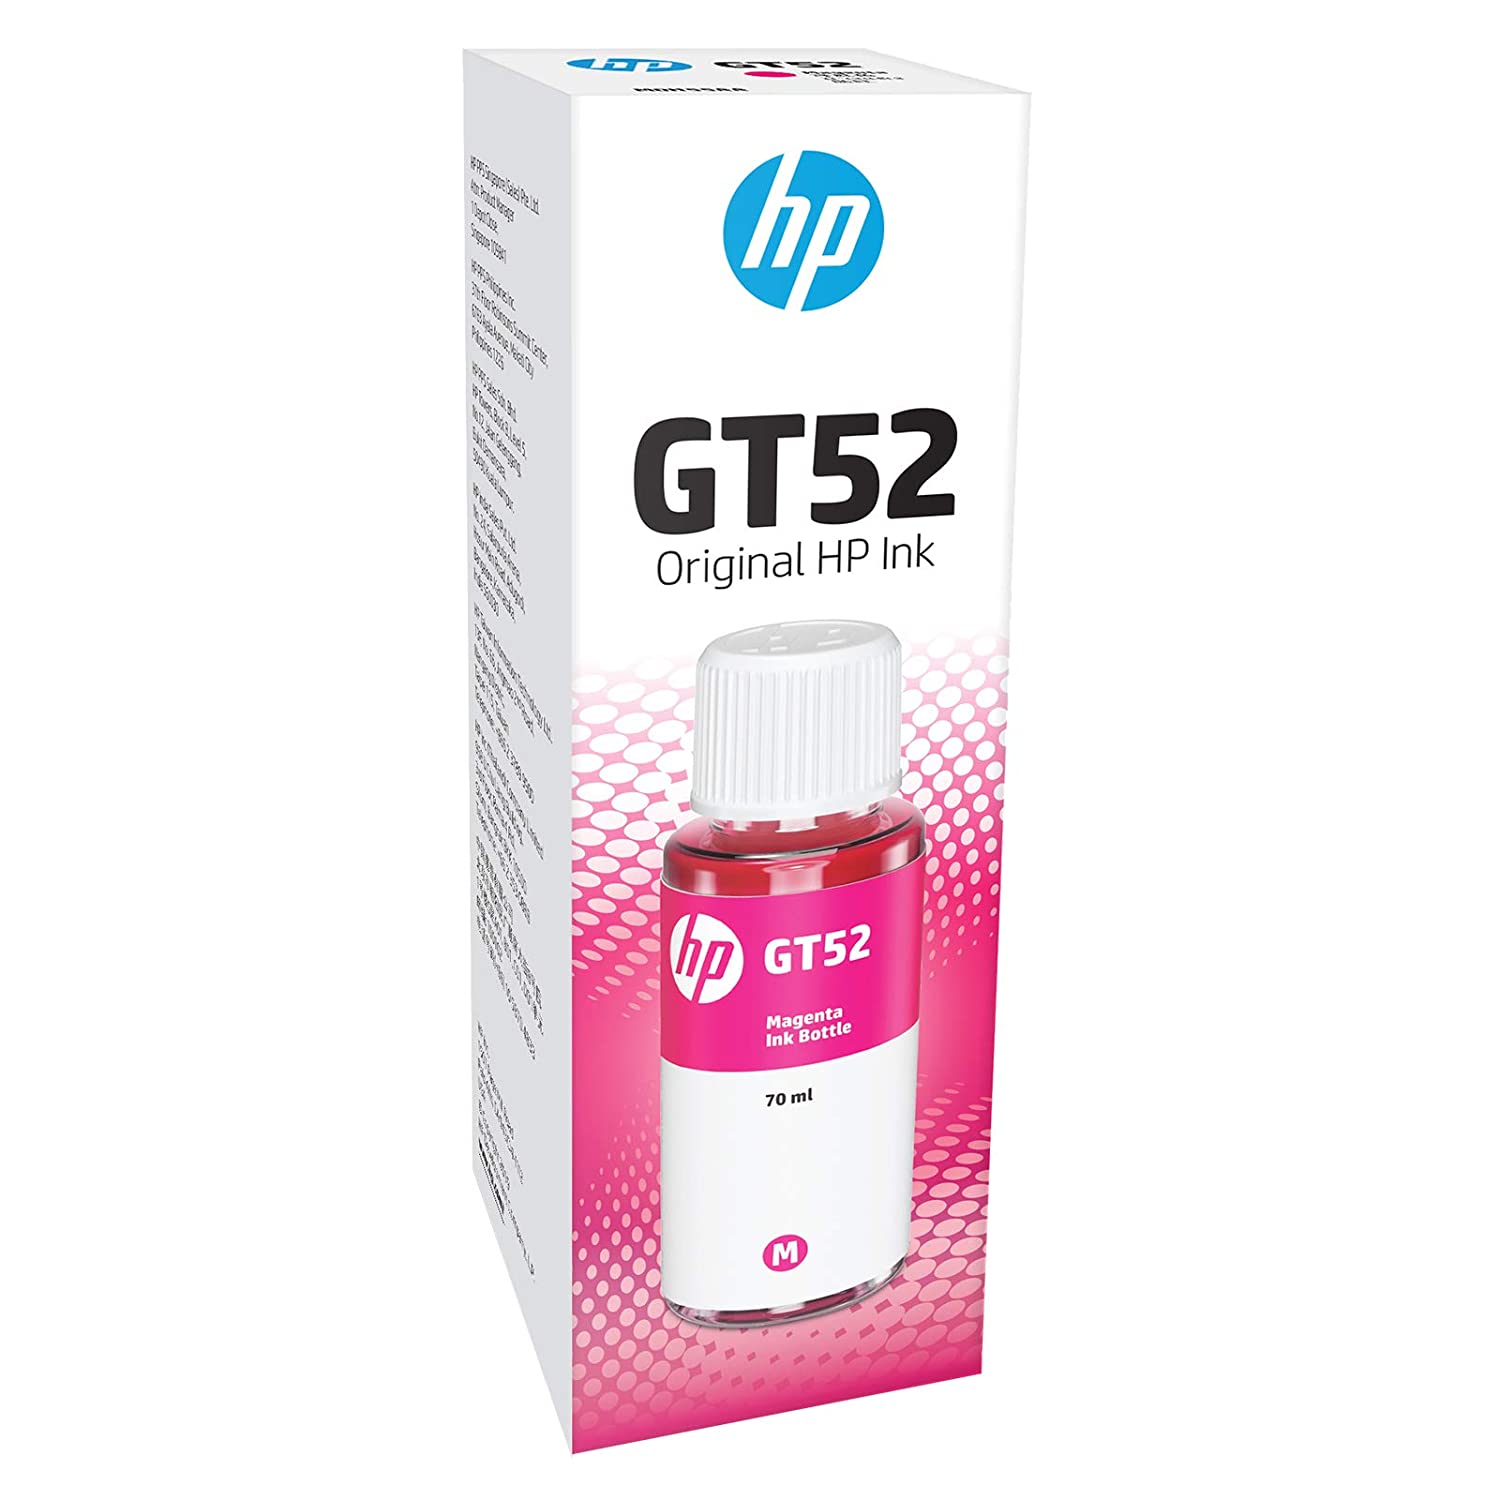 HP GT53  ( replaces GT51 ) and GT52 Refill Ink Bottle for HP Ink Tank Printers